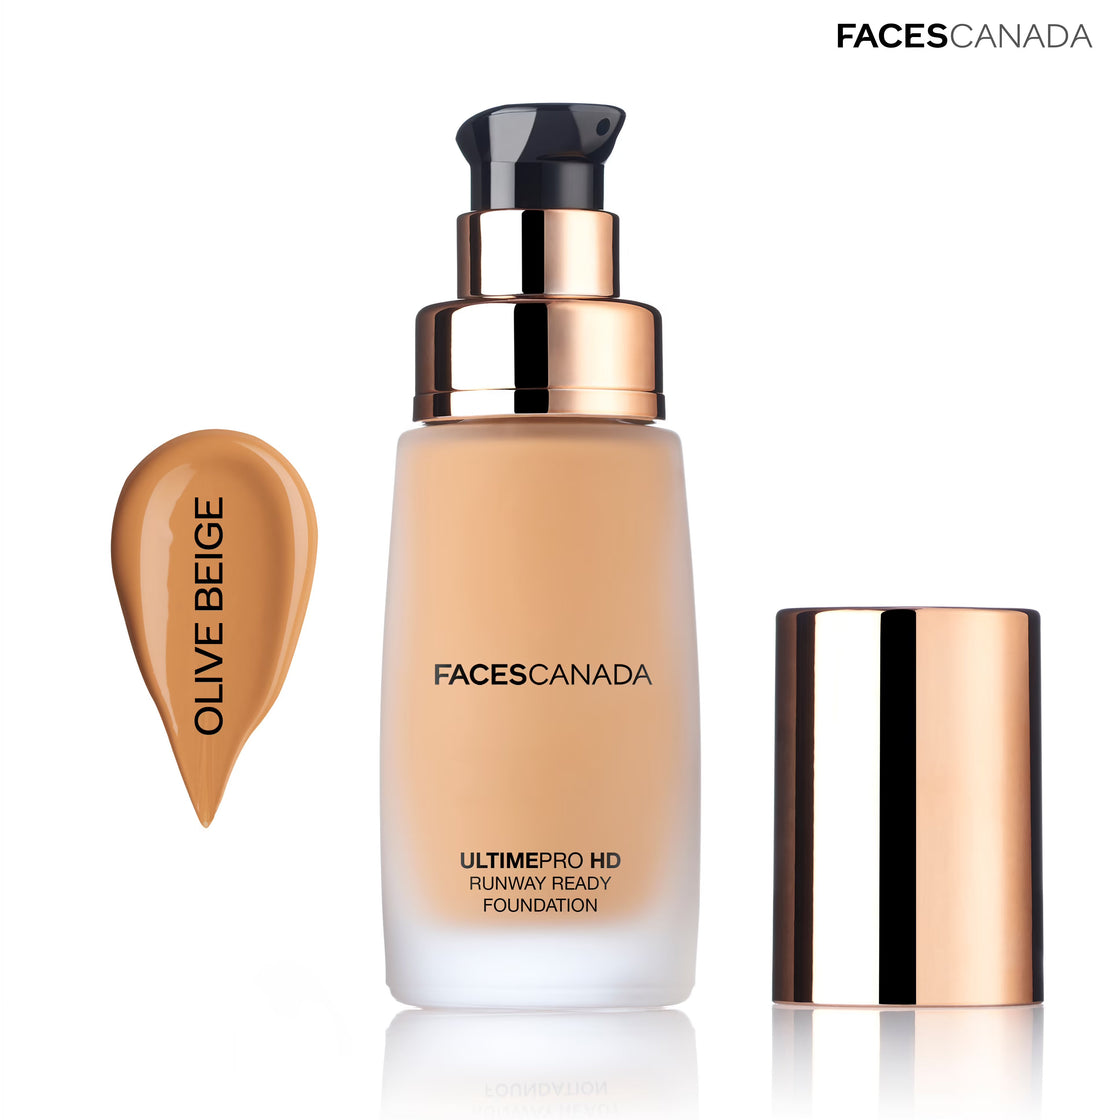 Faces Canada Ultime Pro Hd Runway Ready Foundation -30Ml-7